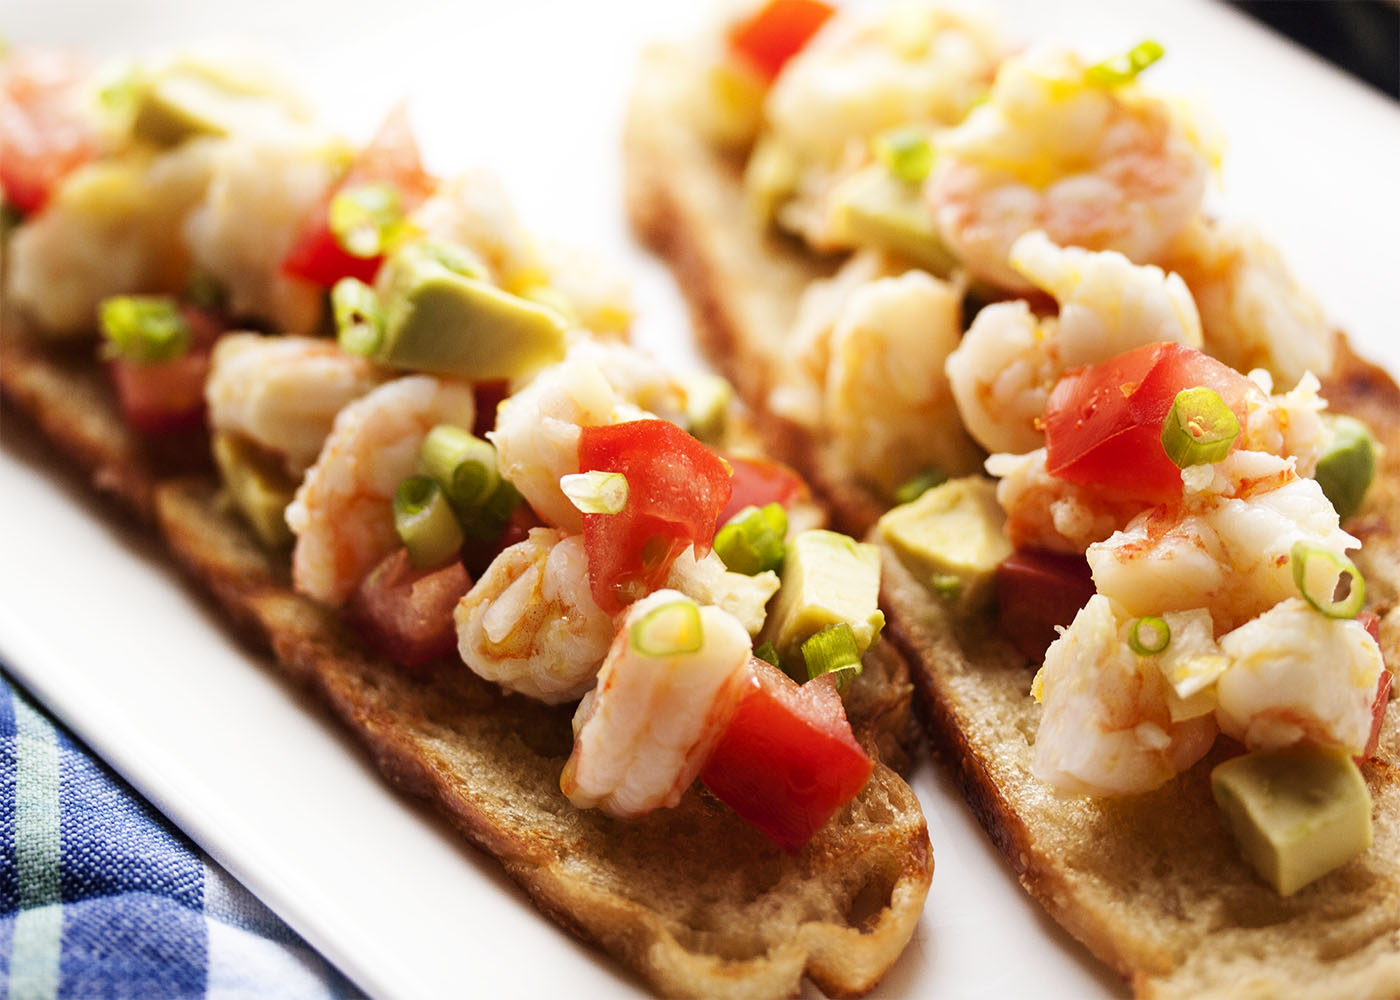 Tomato and Avocado Shrimp Crostini - Beautifully poached shrimp are marinated in lemon and olive oil and paired with grilled bread, diced tomato, and avocado in this Shrimp Crostini. Poaching keeps the shrimp tender and infuses them with flavor. So good! | justalittlebitofbacon.com